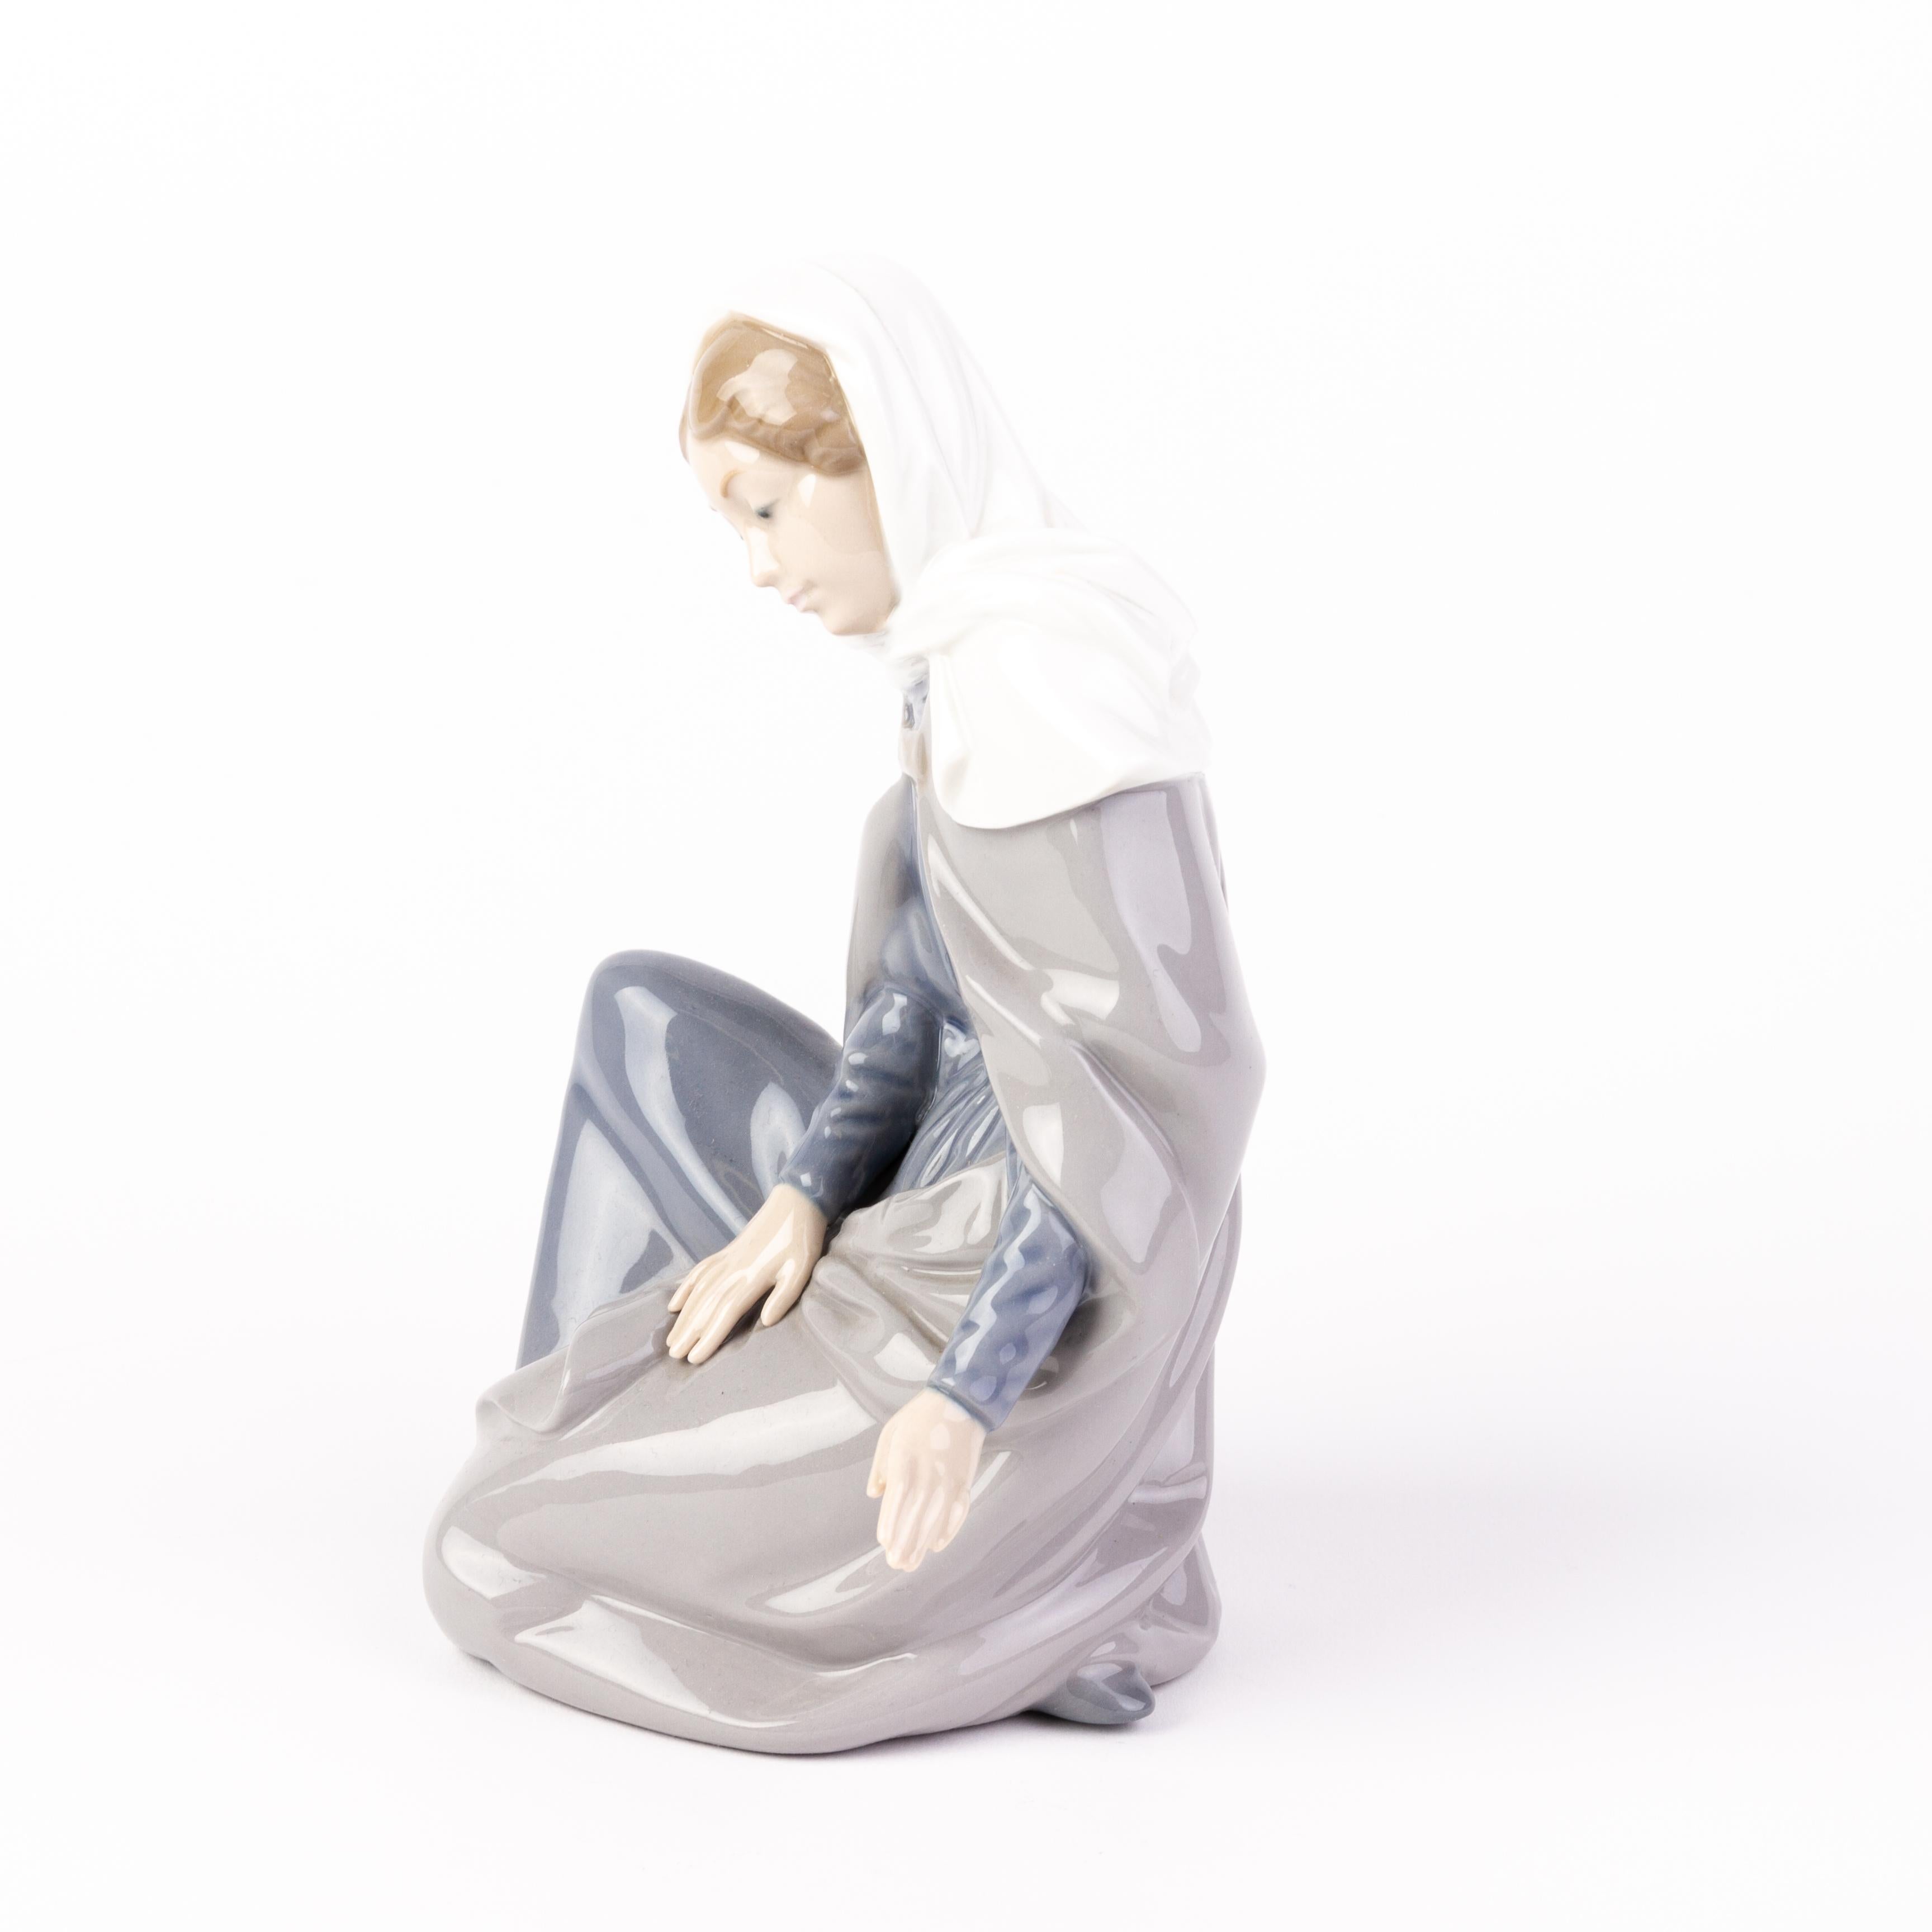 In good condition
From a private collection
Free international shipping
Nao Lladro Fine Porcelain Virgin Mary Figure 